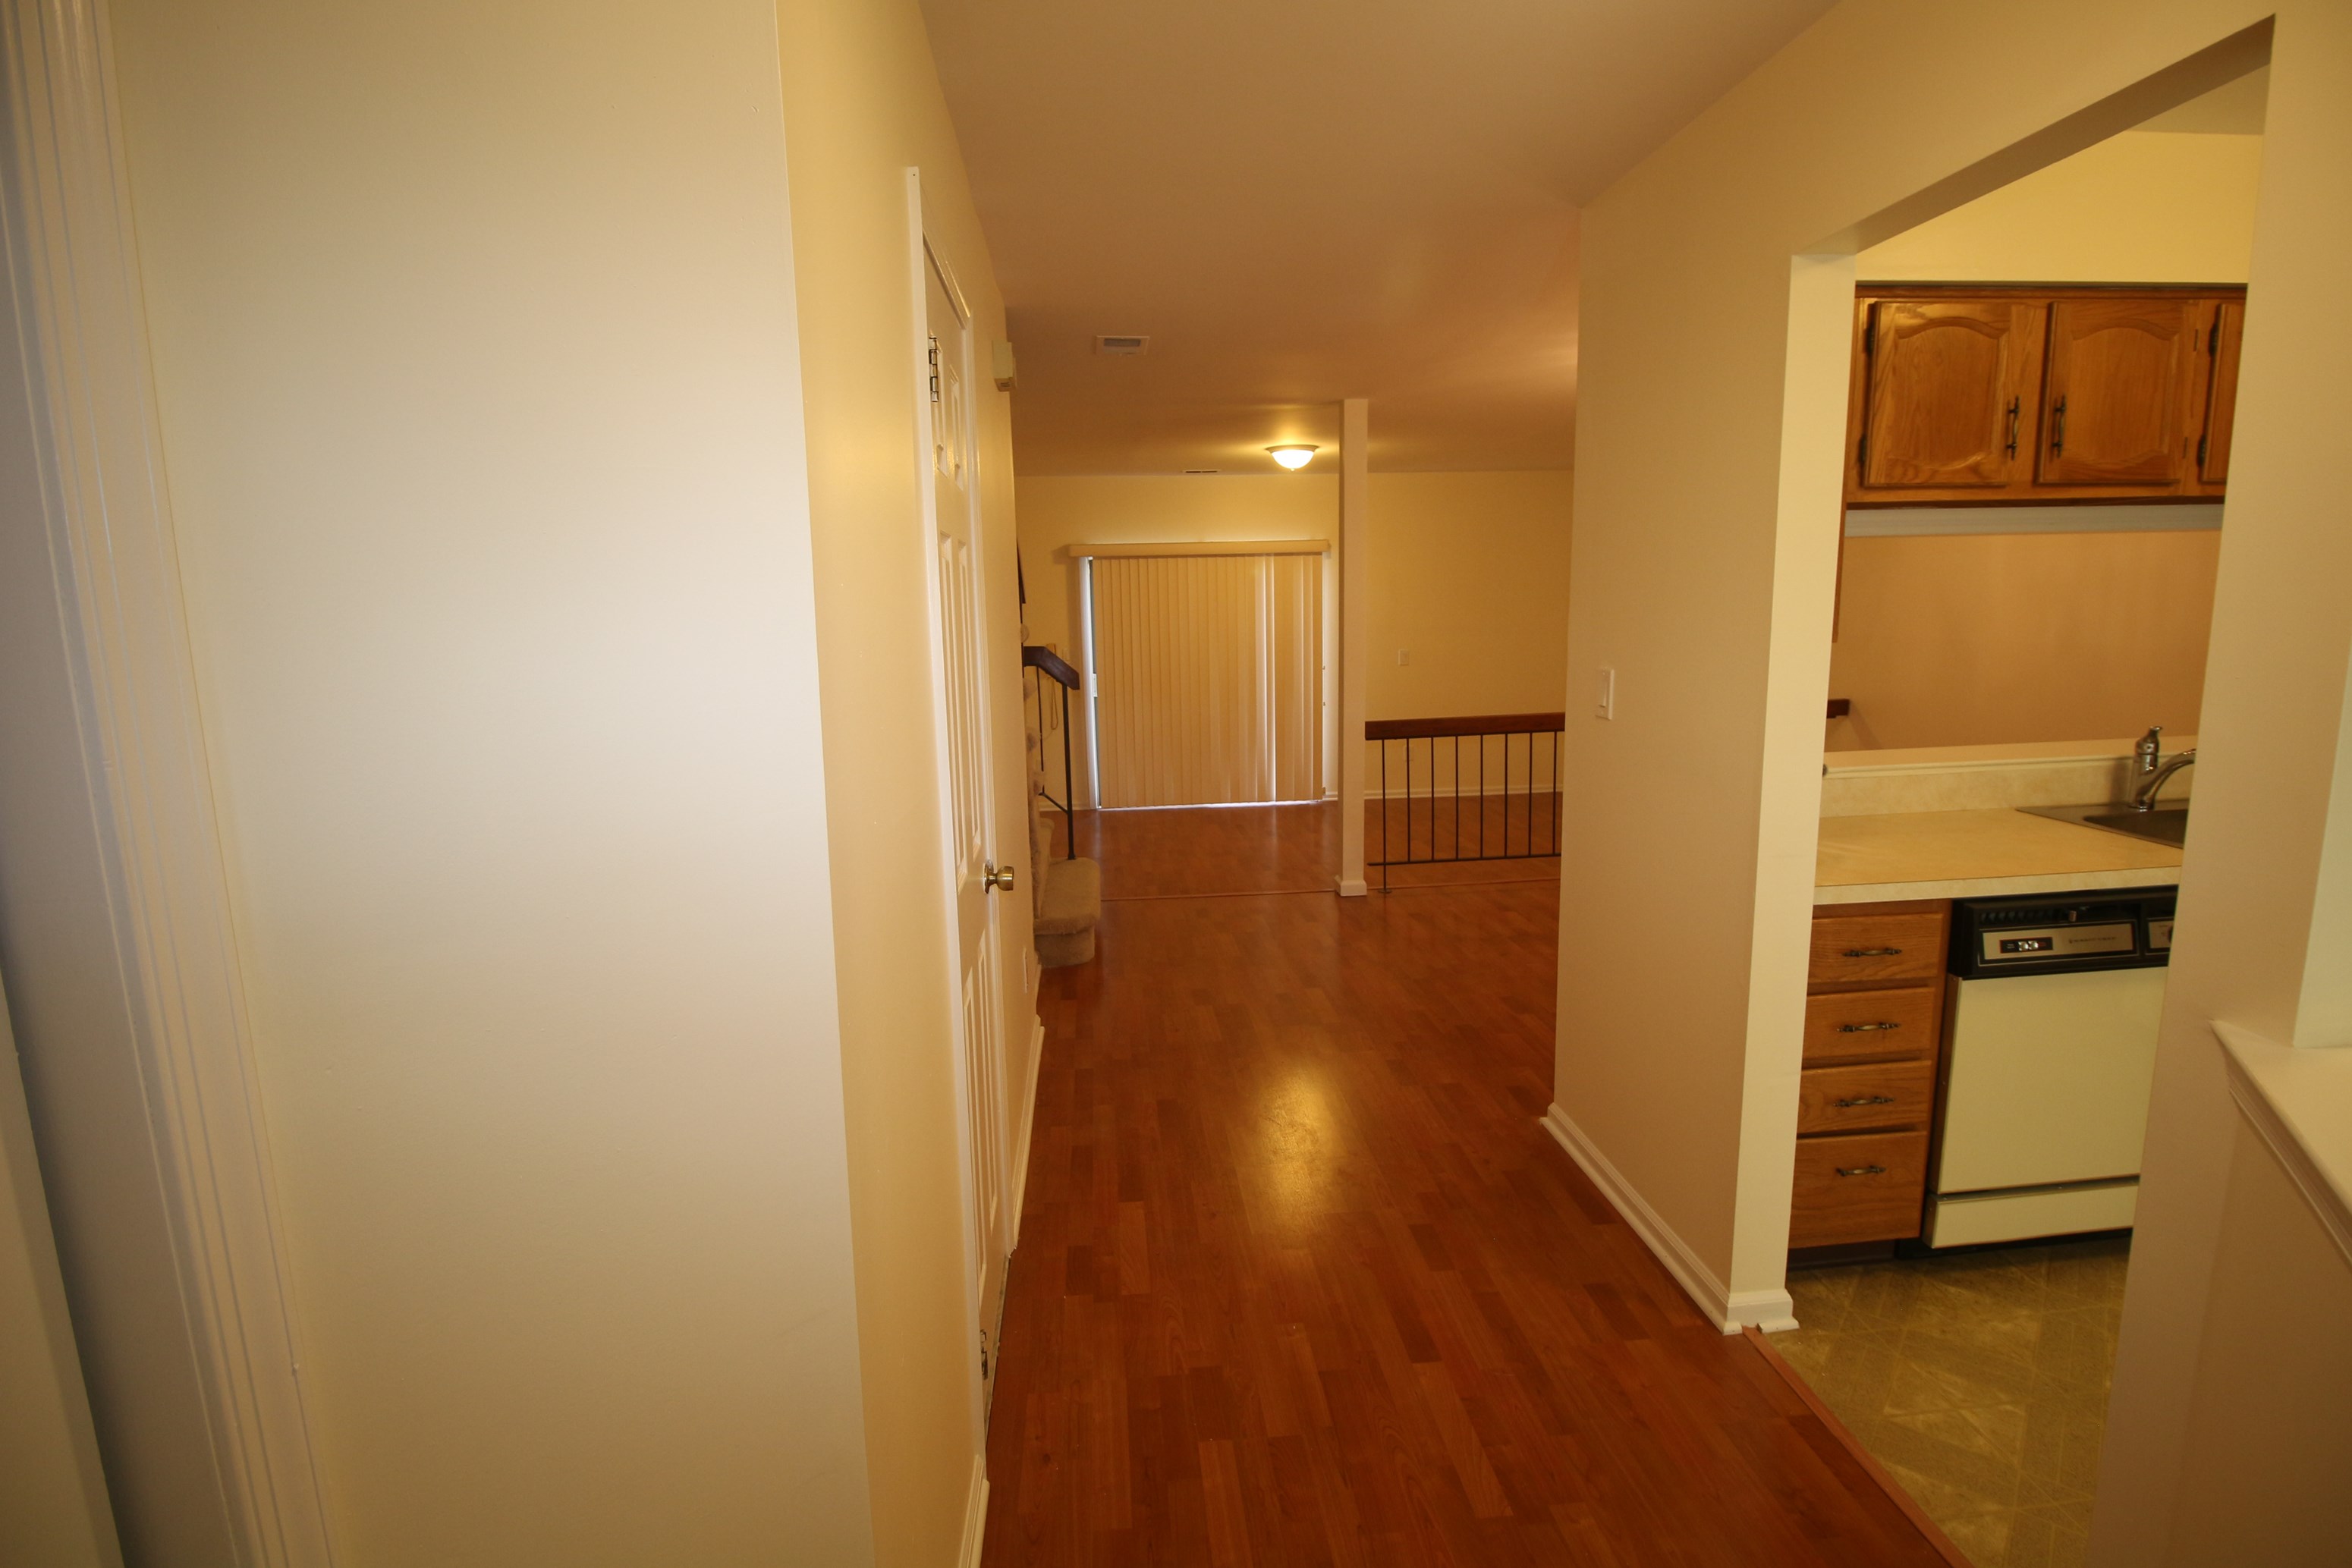 2 Bedroom House for Rent in Edison, NJ , Two Bedroom Homes for Rental